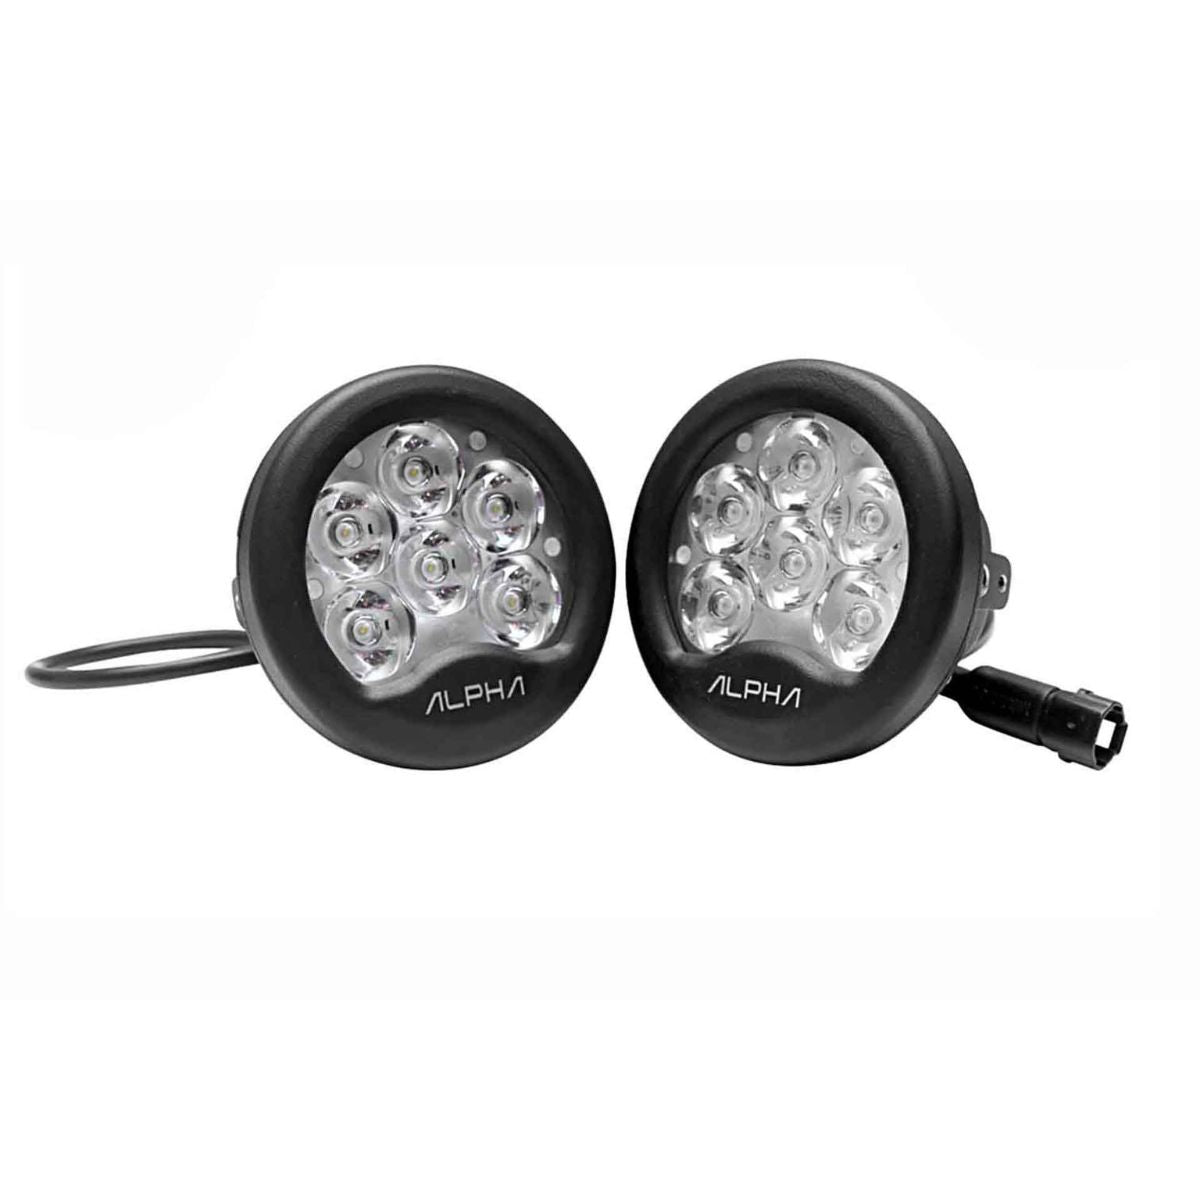 Alpha Auxiliary Light for Motorcycles - 40 Watts - 3 